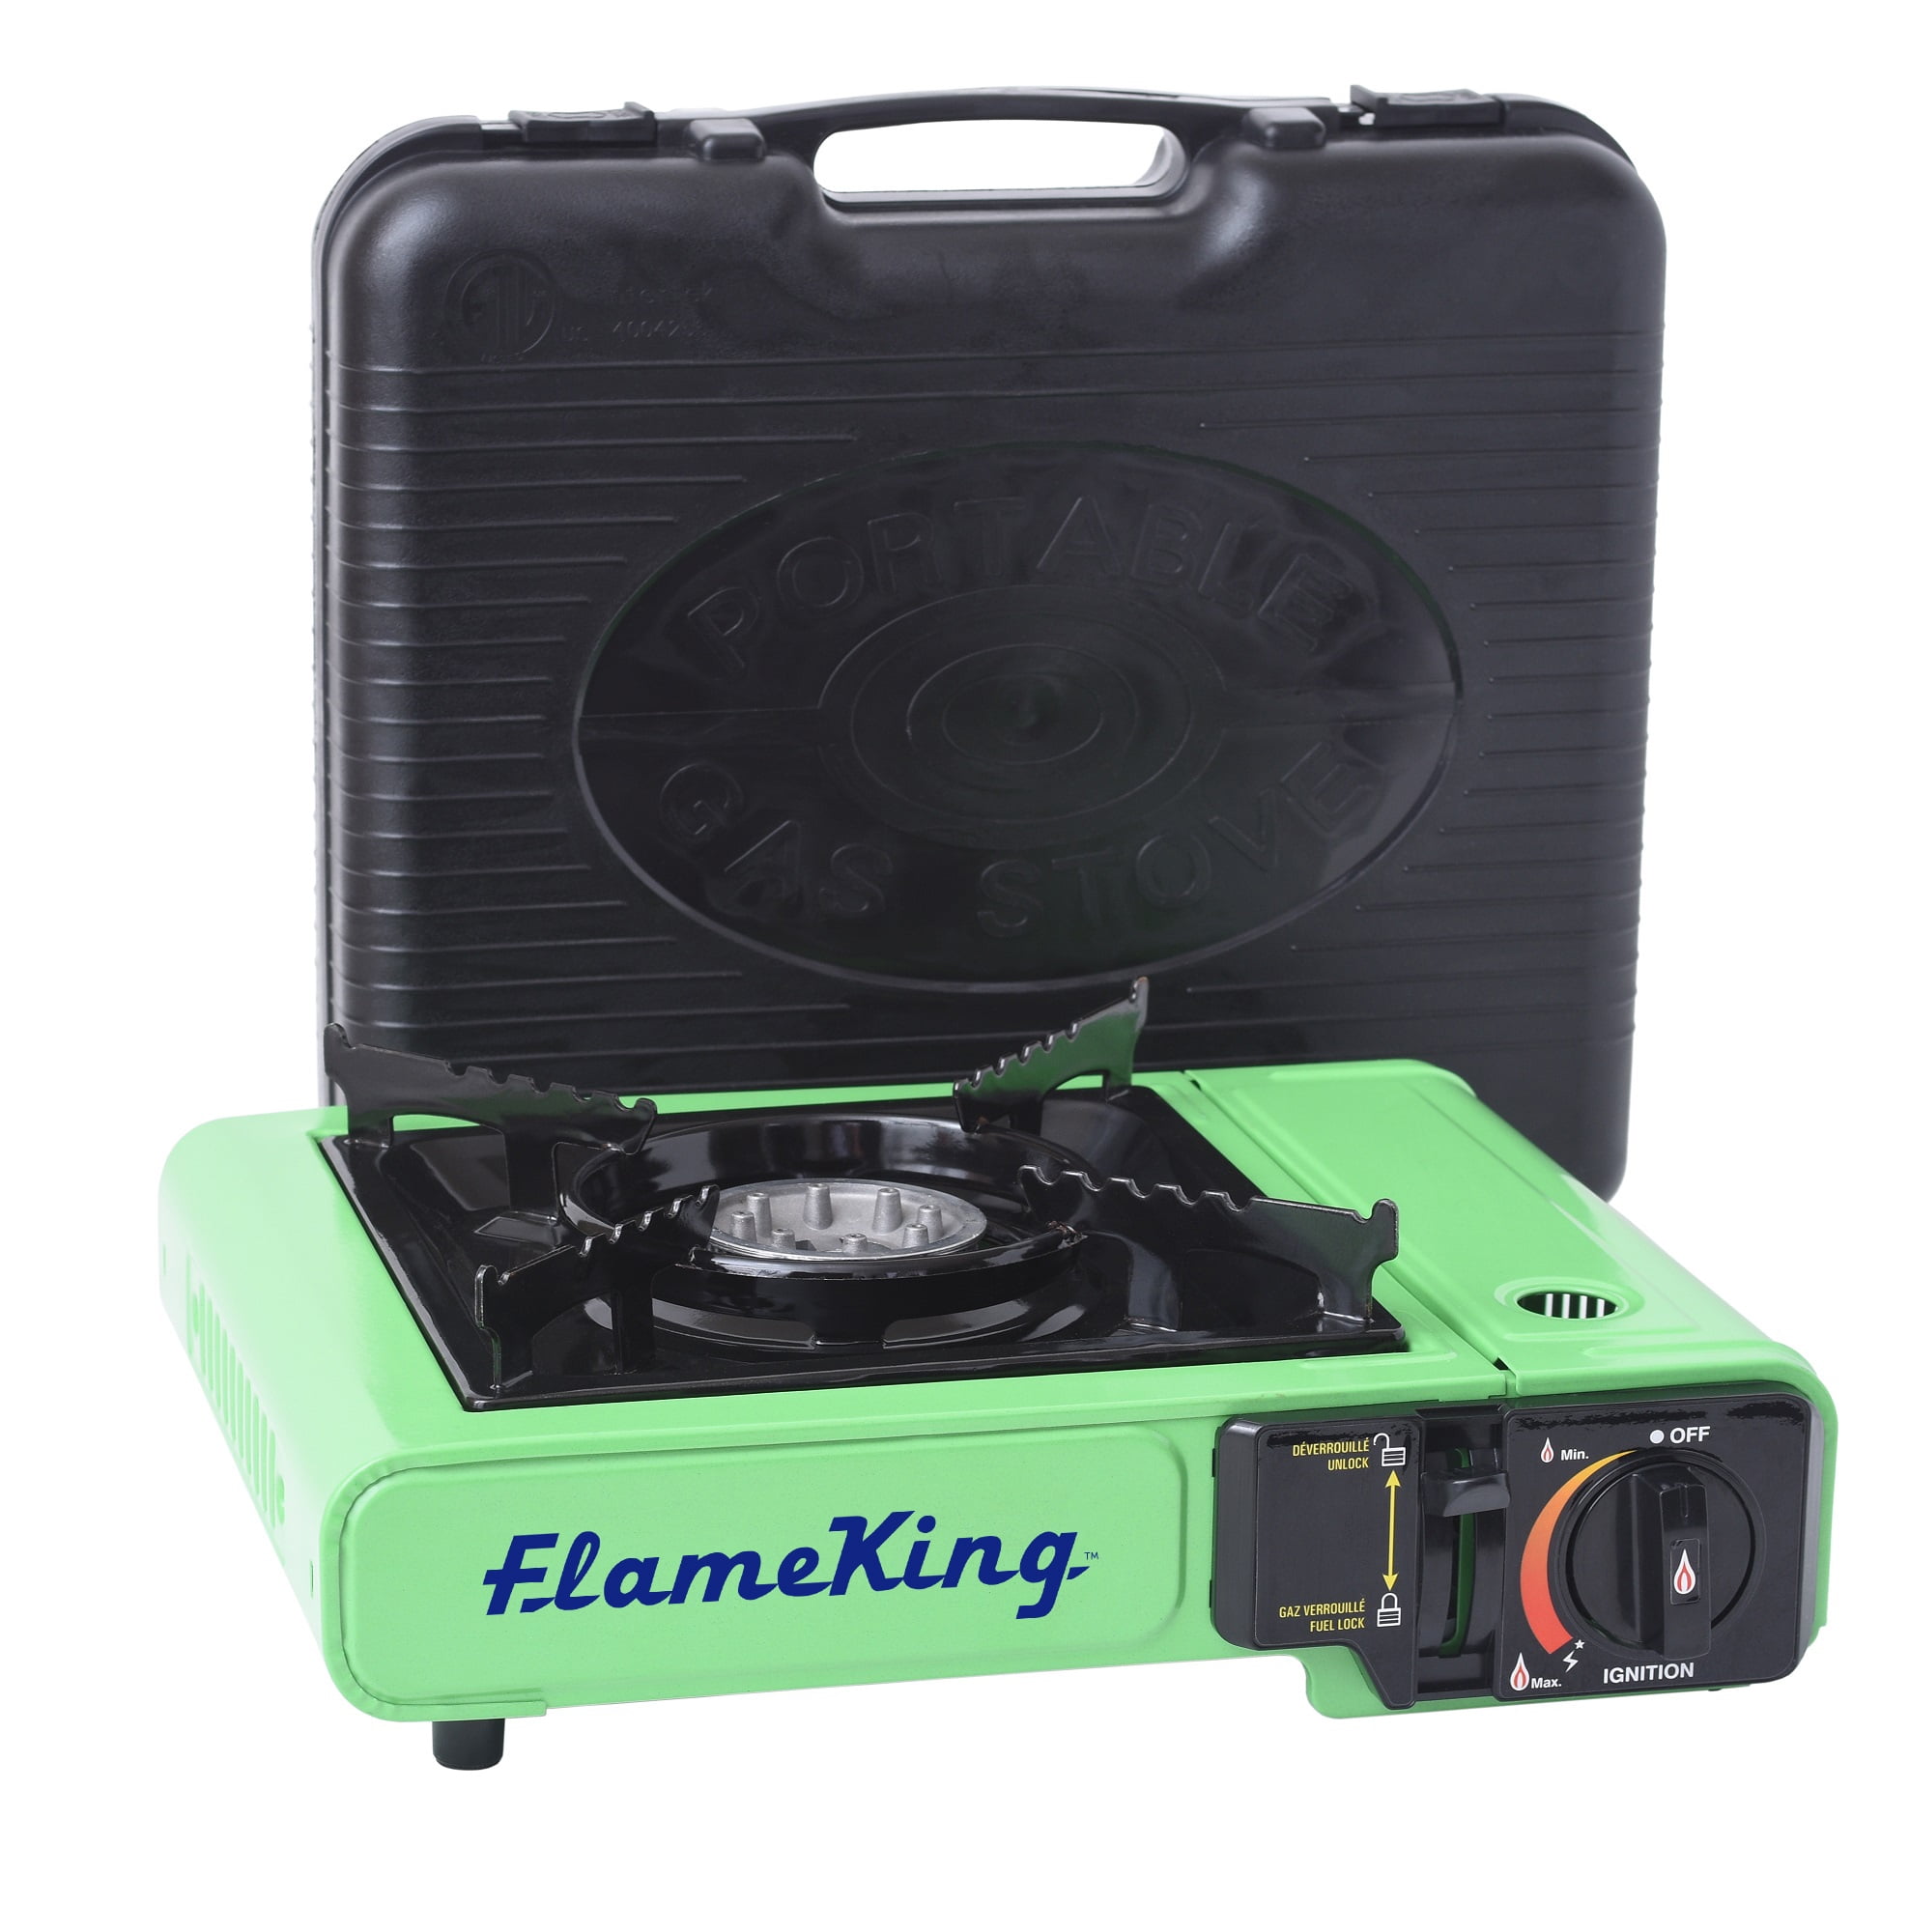 Flame King Portable Outdoor Propane Oven Stove Combo for Camping, RV,  Tailgating, Trailer, Green/Black (YSNHT-300)